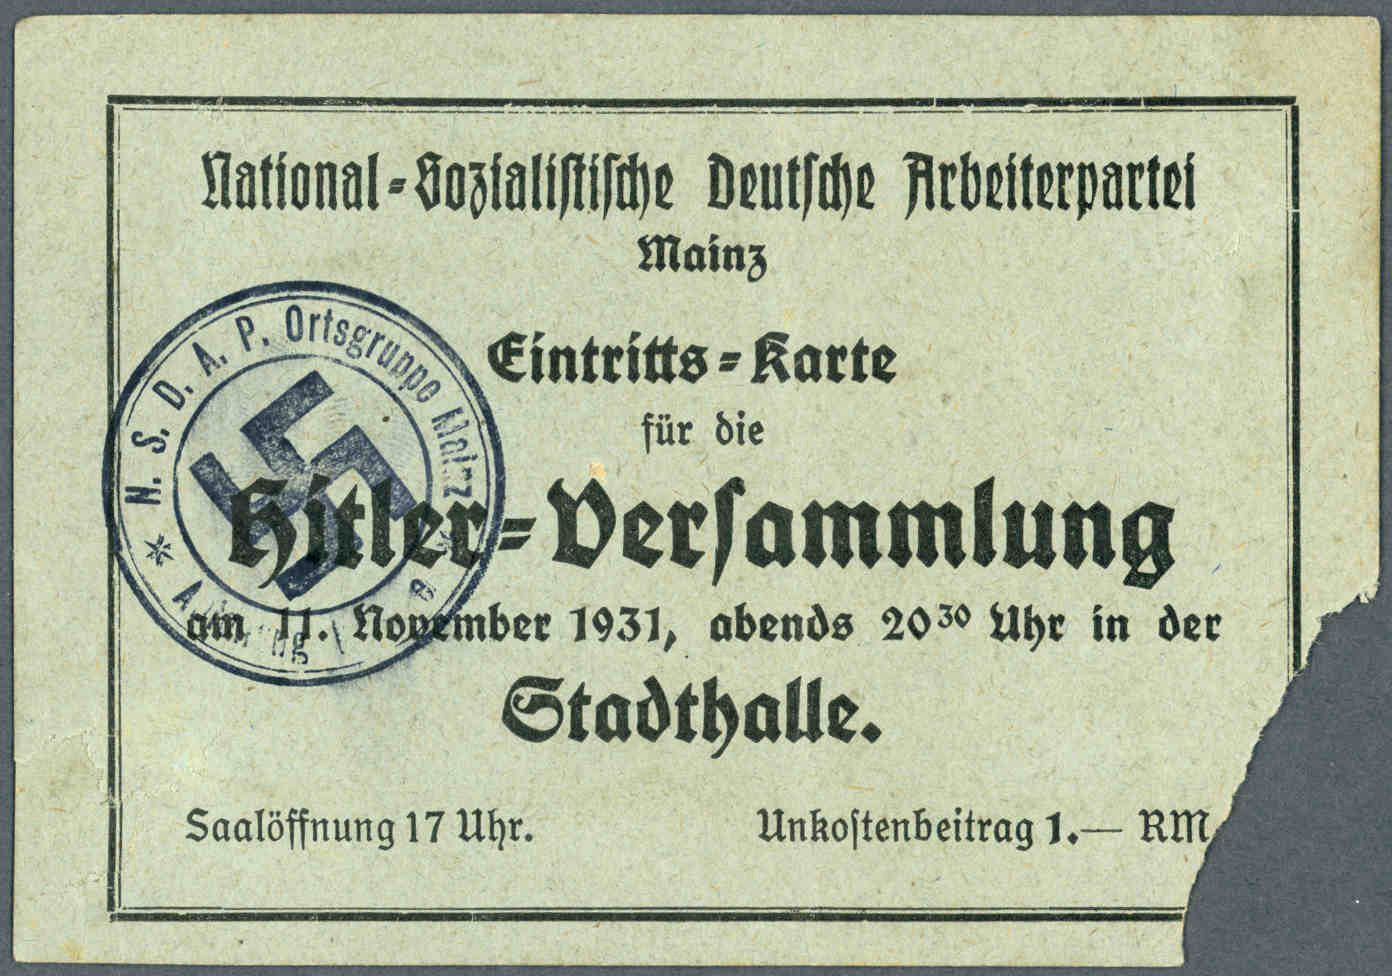 Ticket for a speech by Adolf Hitler in Mainz's Stadthalle in front of 20,000 participants